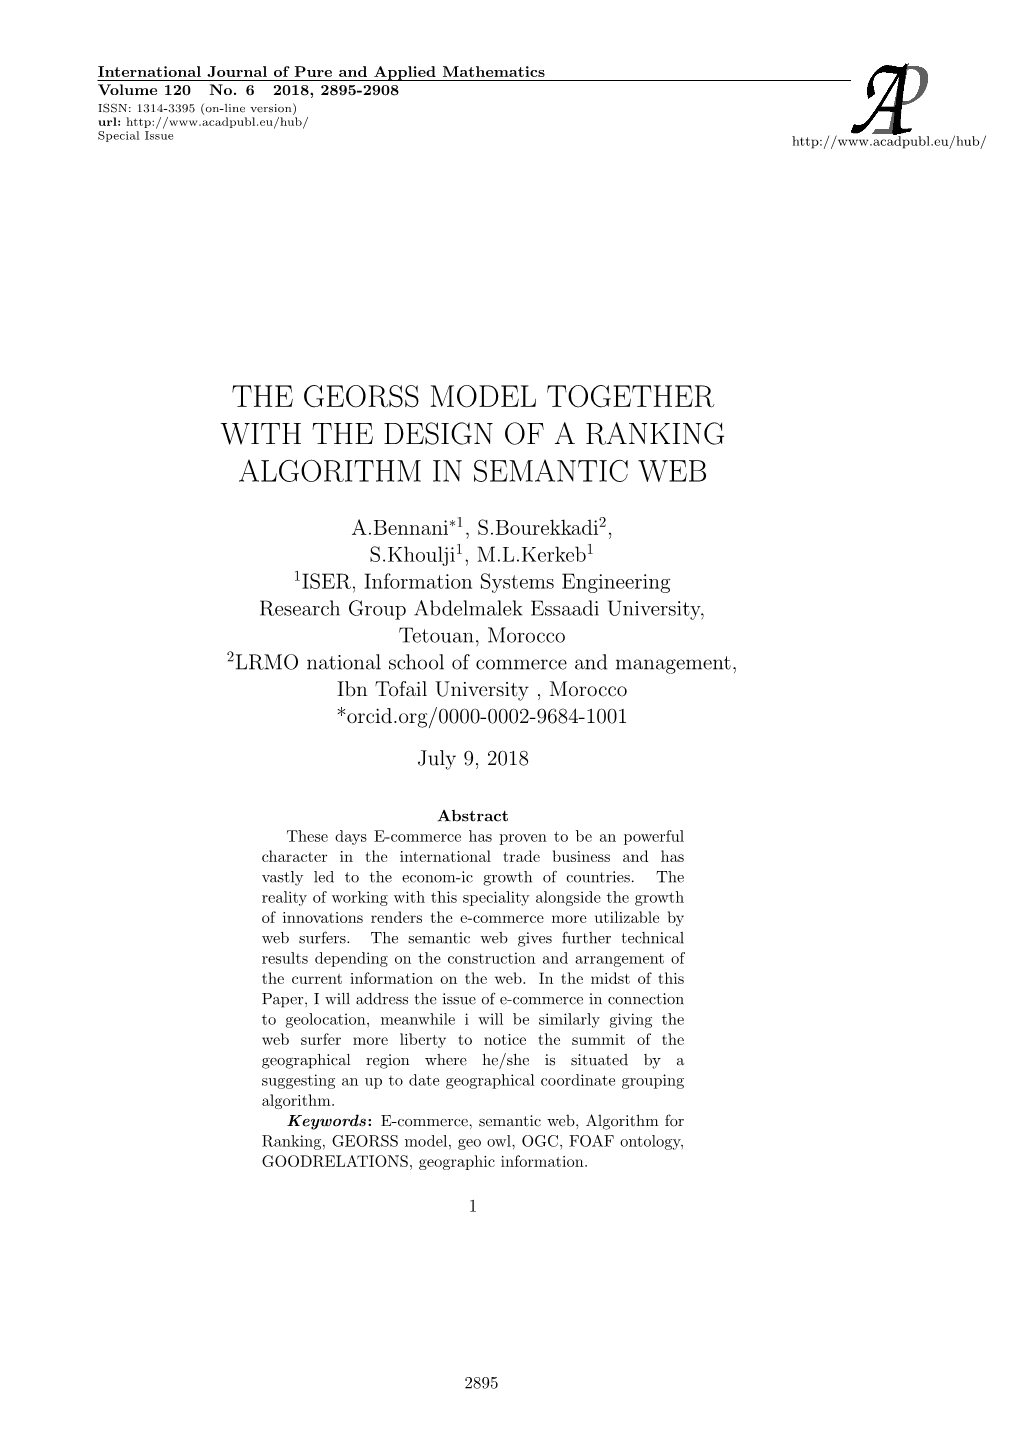 The Georss Model Together with the Design of a Ranking Algorithm in Semantic Web